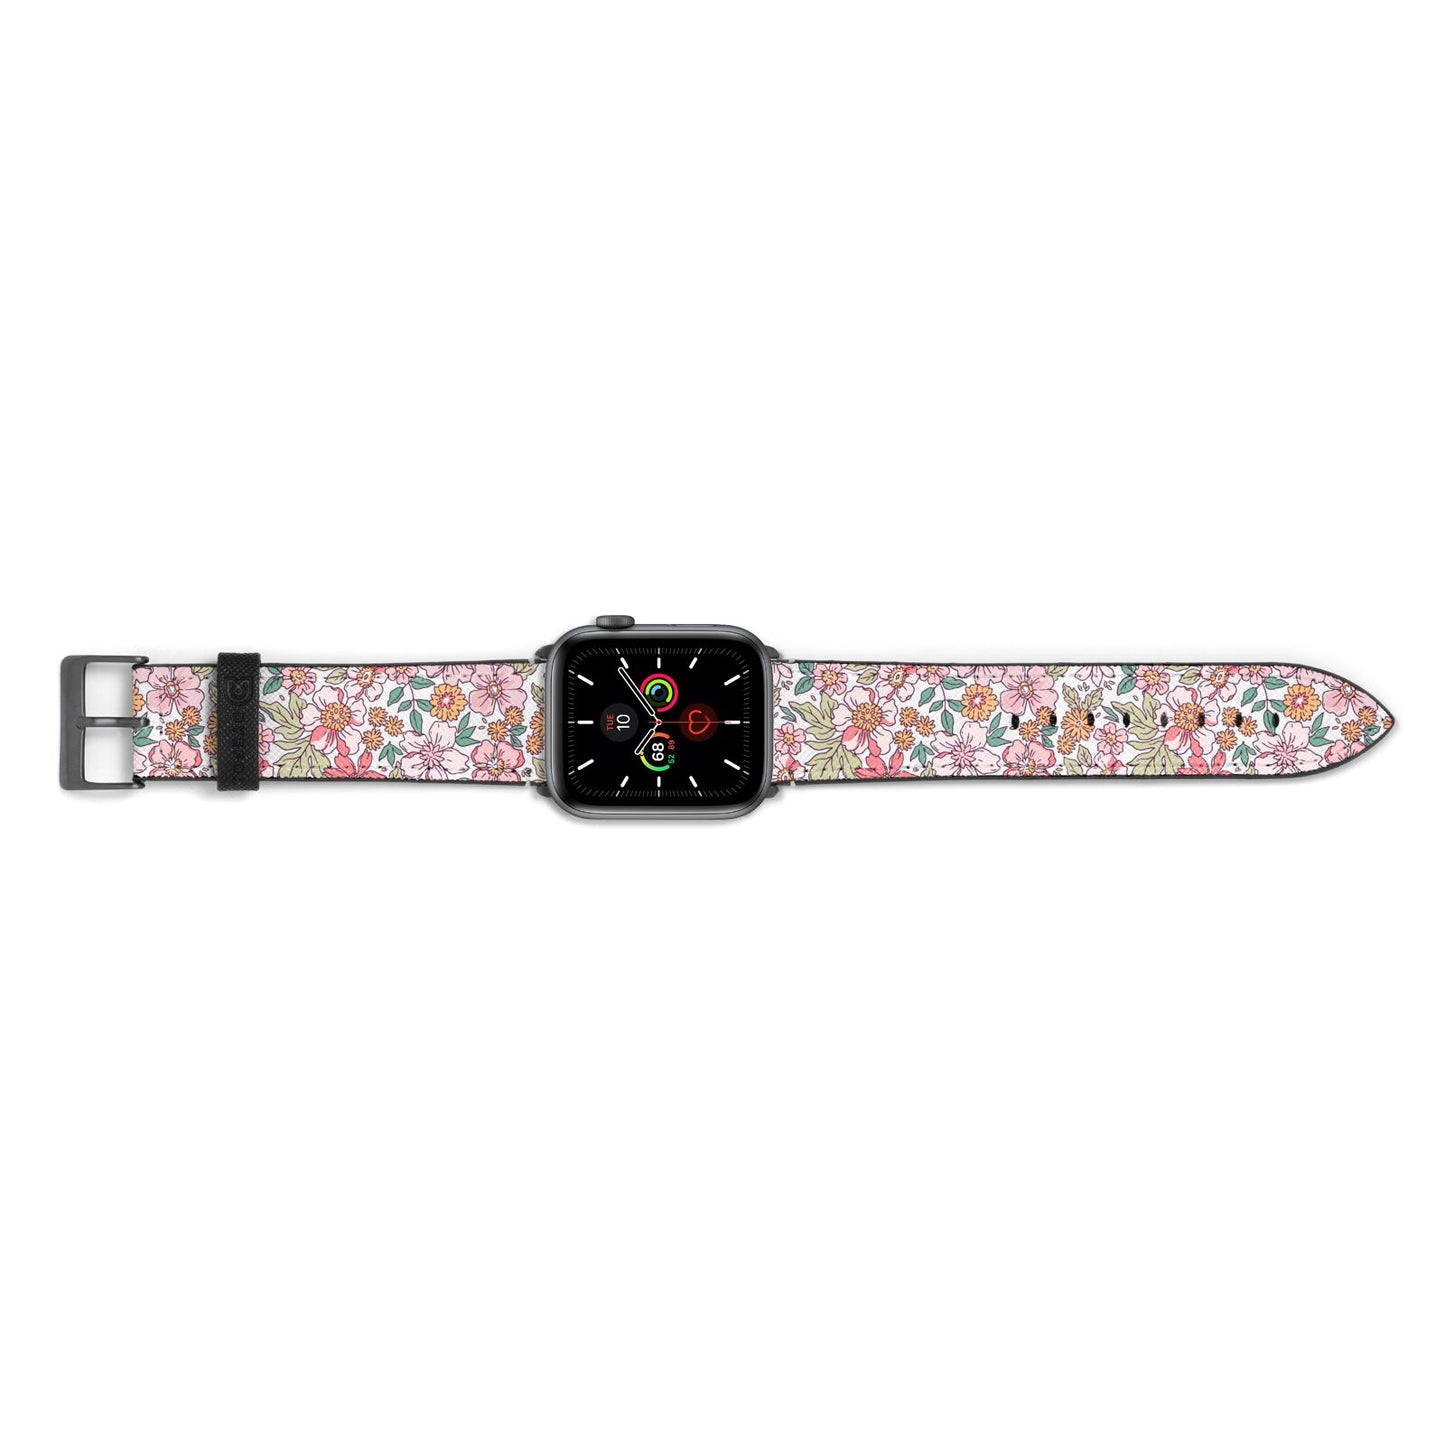 Small Floral Pattern Apple Watch Strap Landscape Image Space Grey Hardware